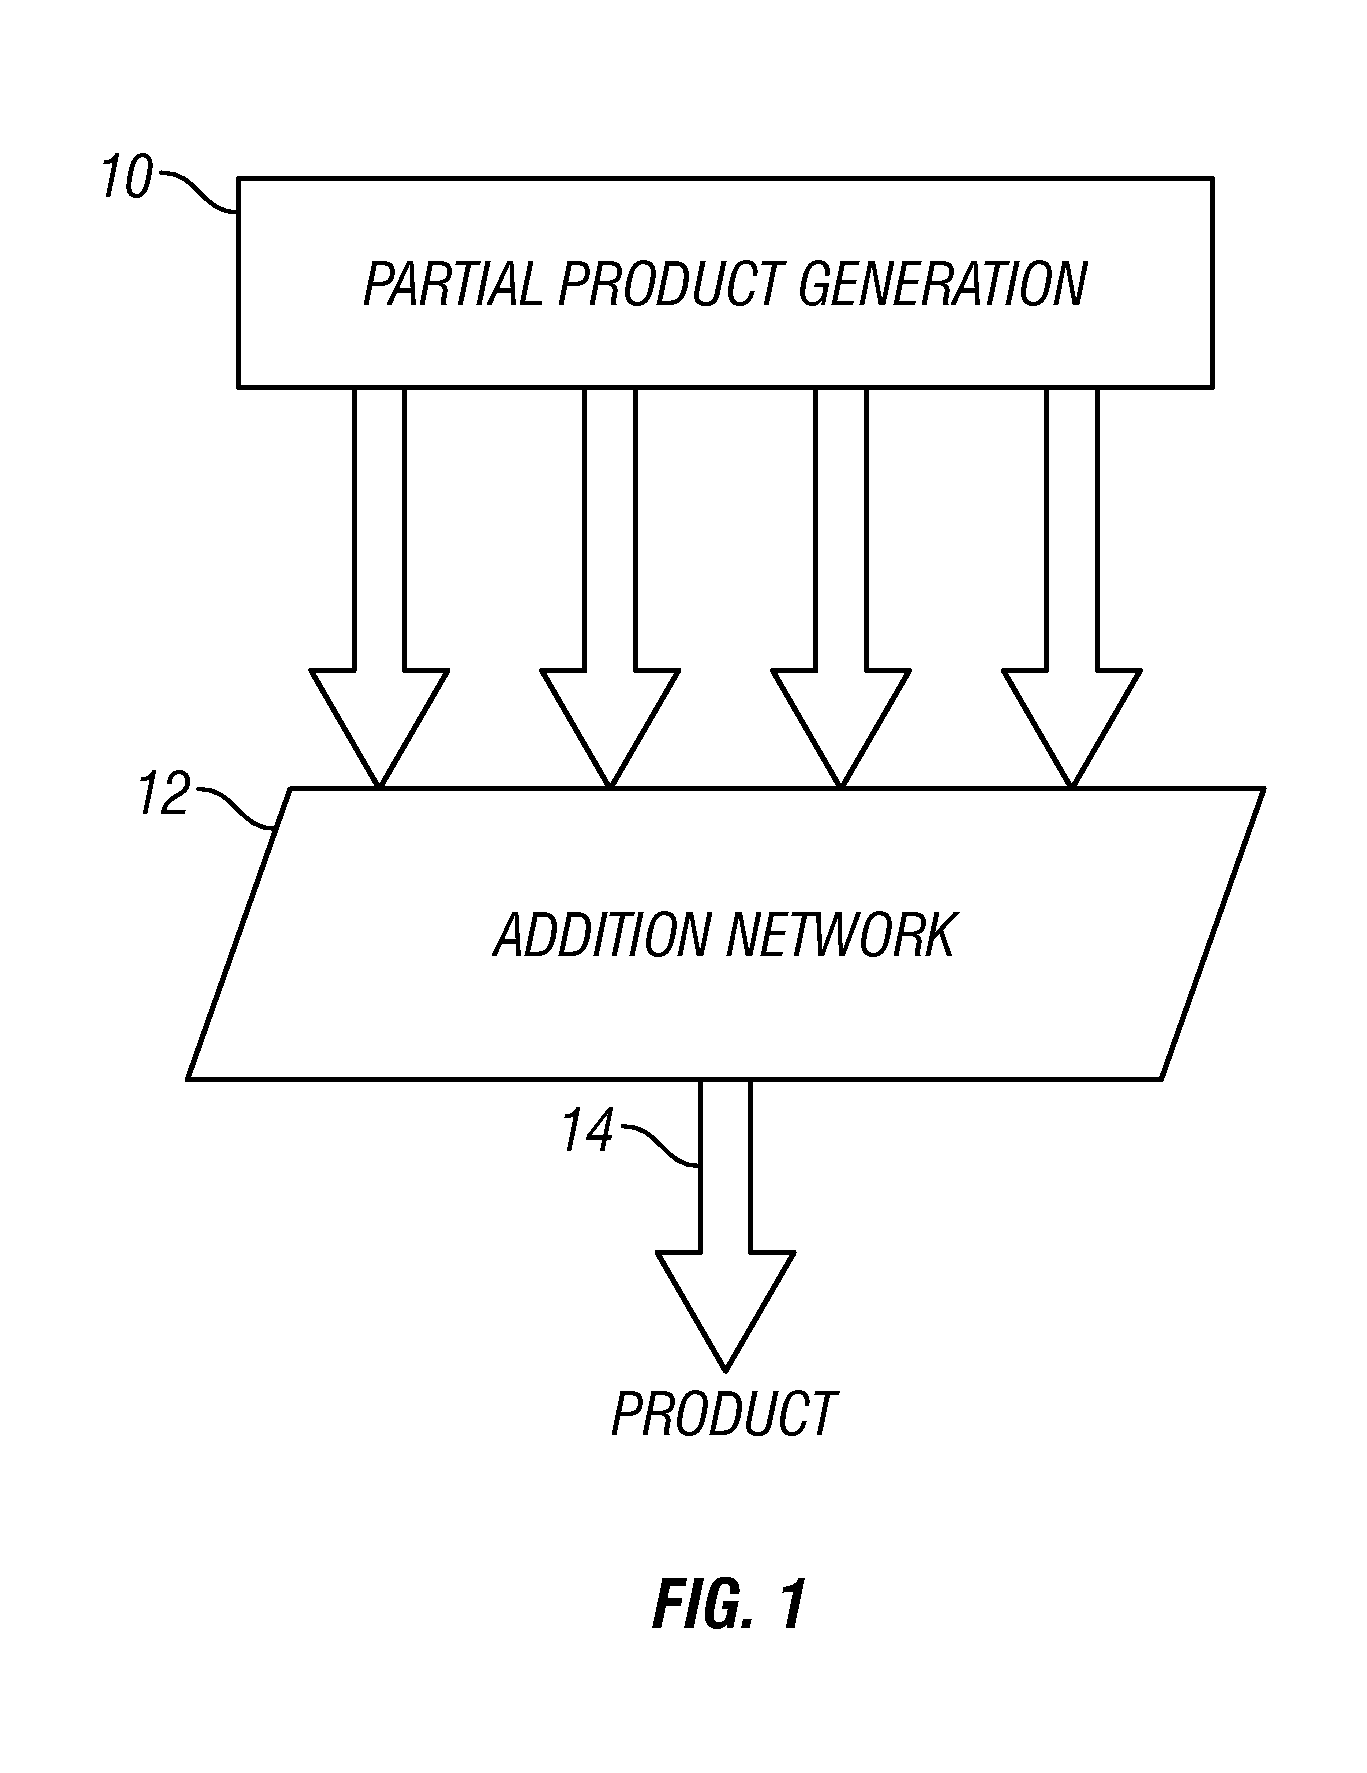 Method and system for formal verification of an electronic circuit design